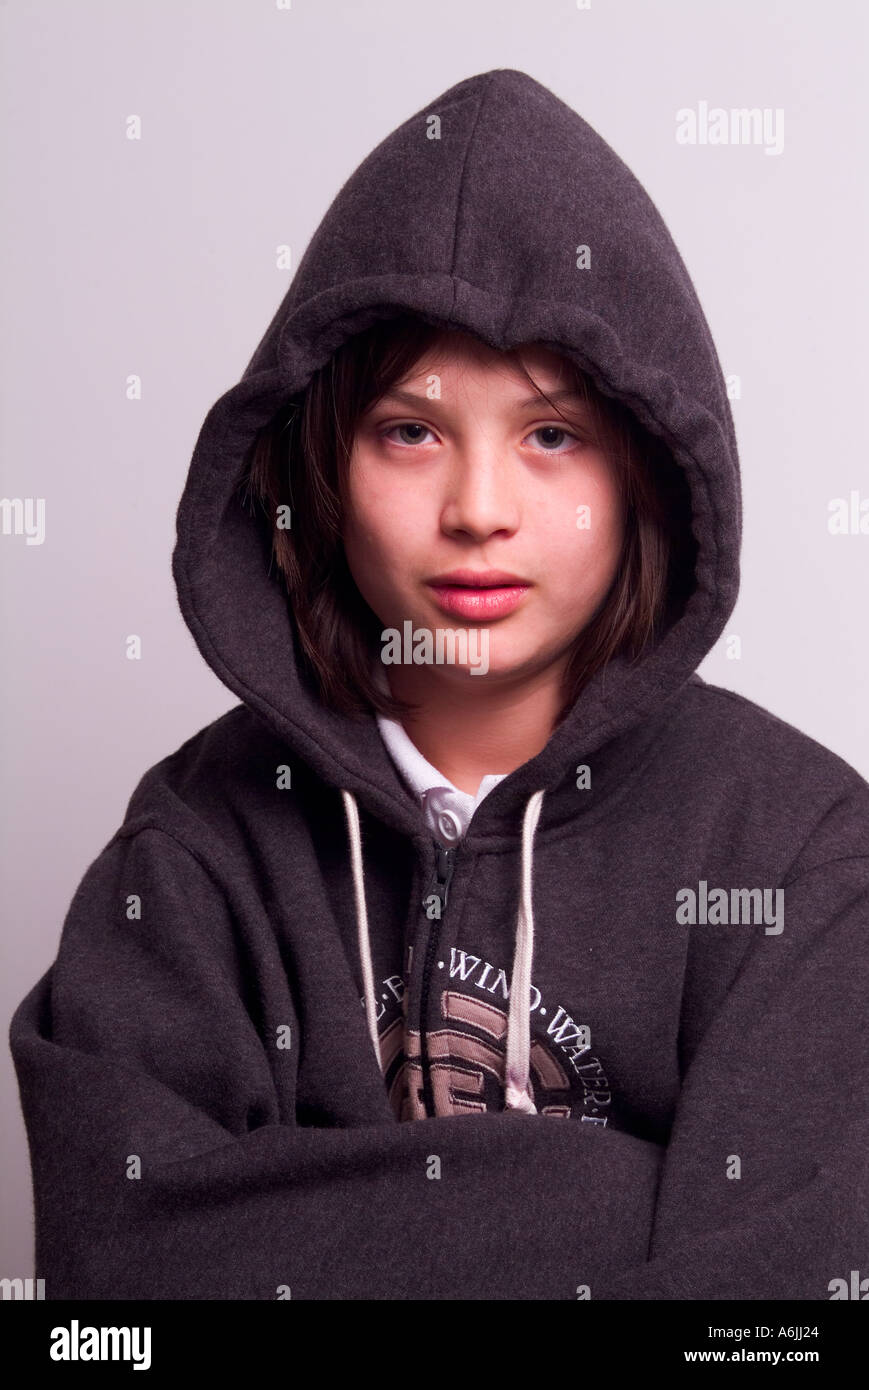 Handsome young 12 year old boy wearing a hoodie Stock Photo